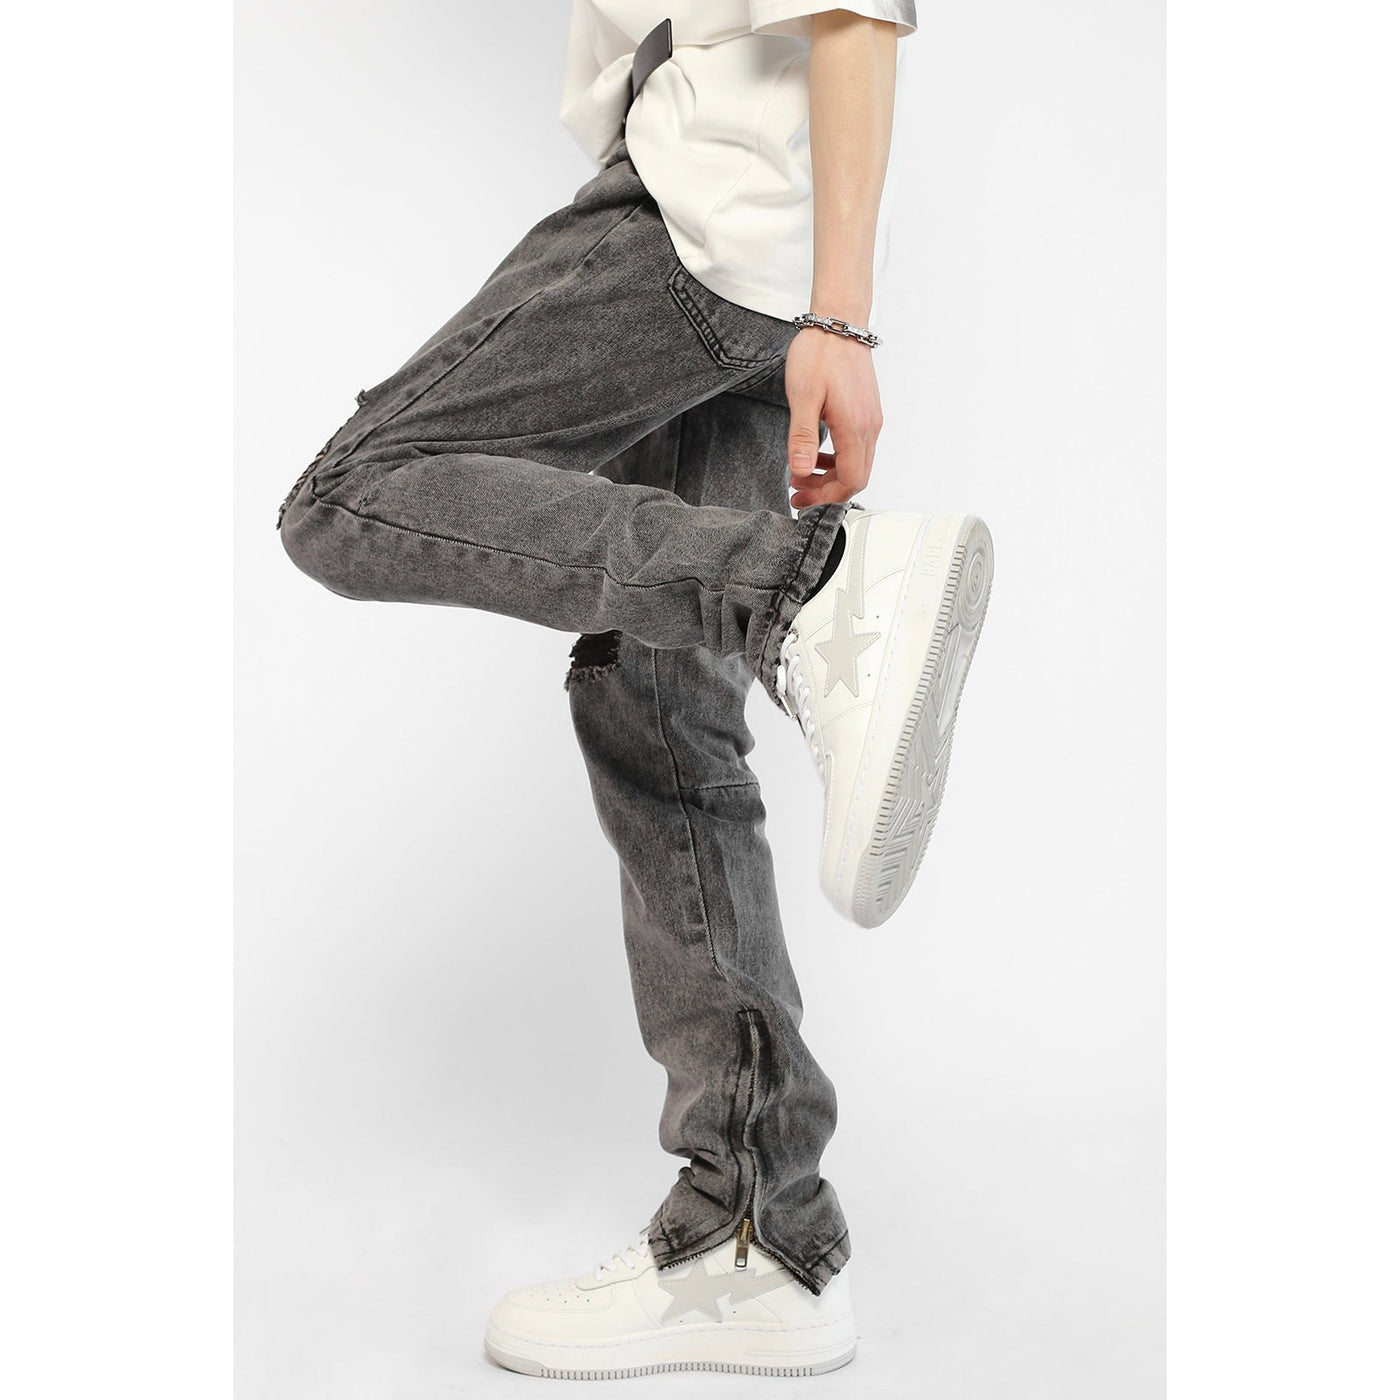 Ripped Textured Jeans Korean Street Fashion Jeans By Poikilotherm Shop Online at OH Vault